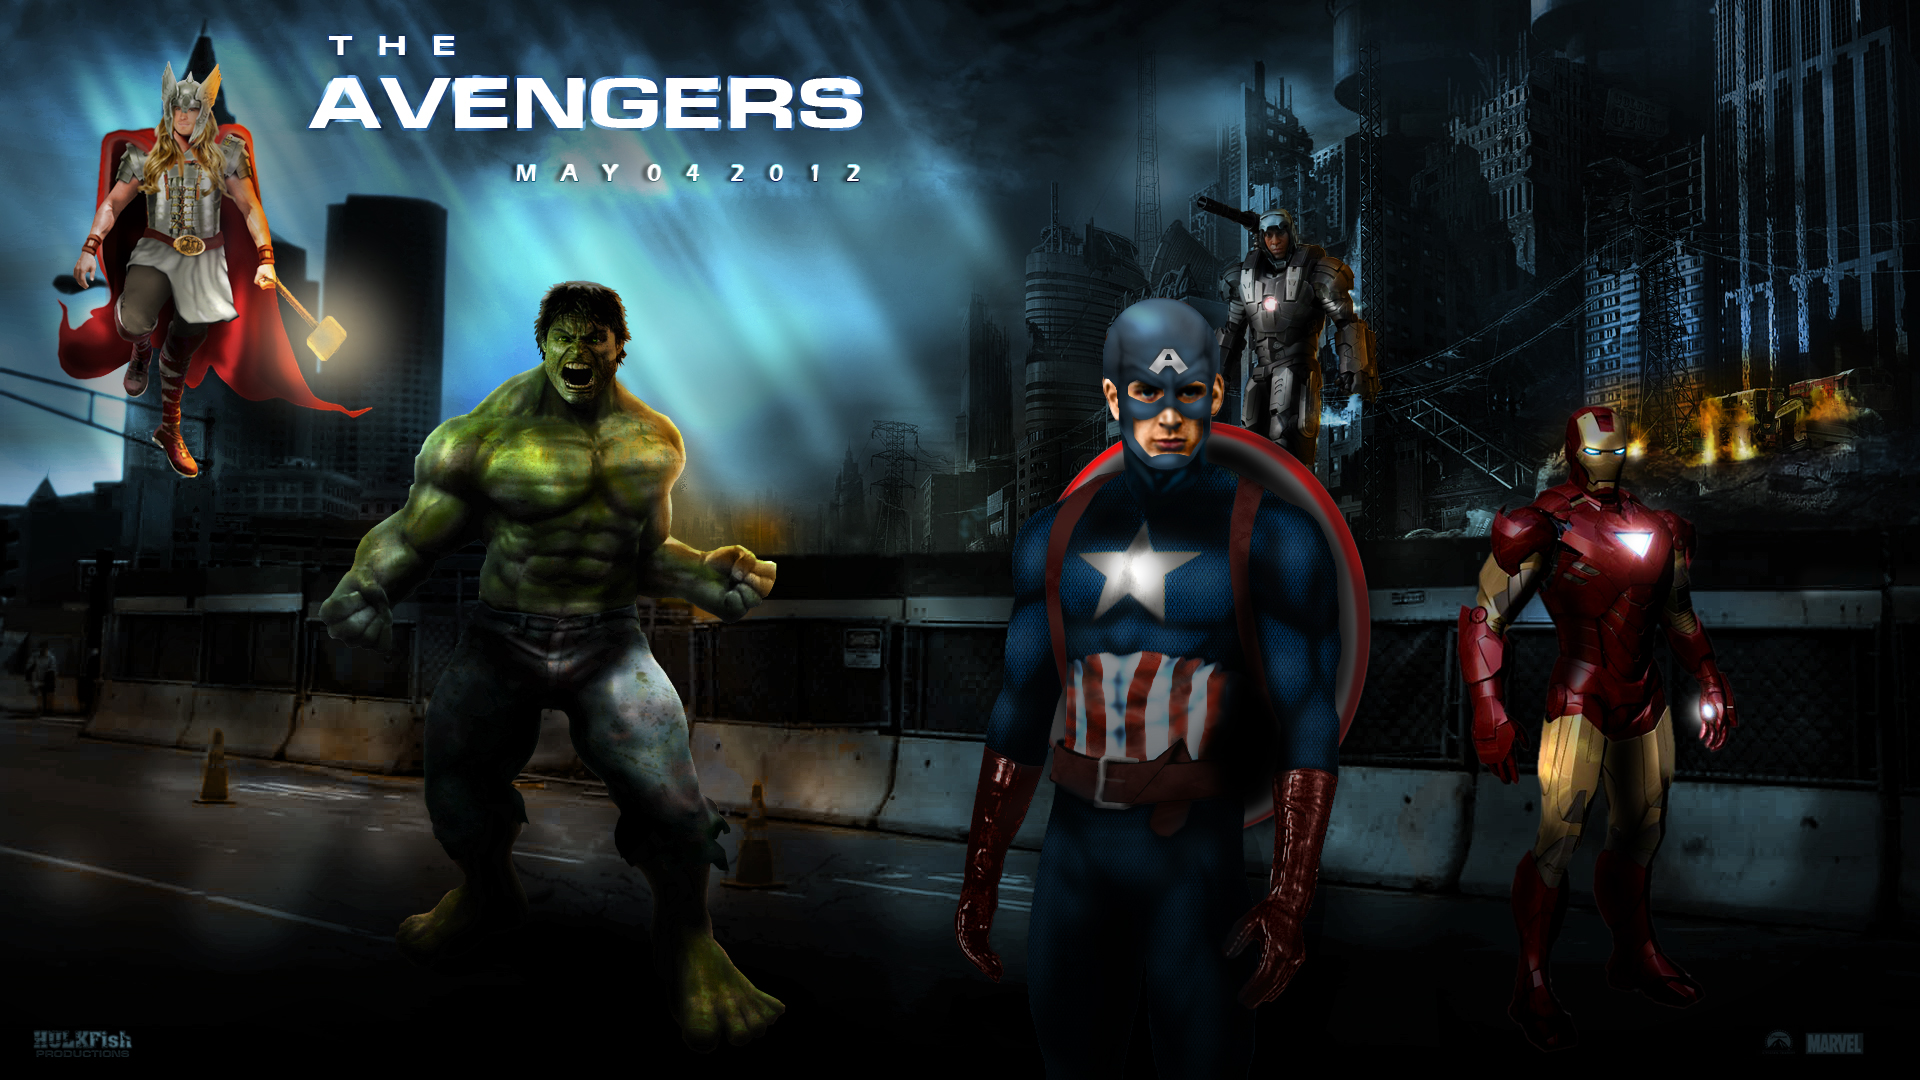 download free avengers